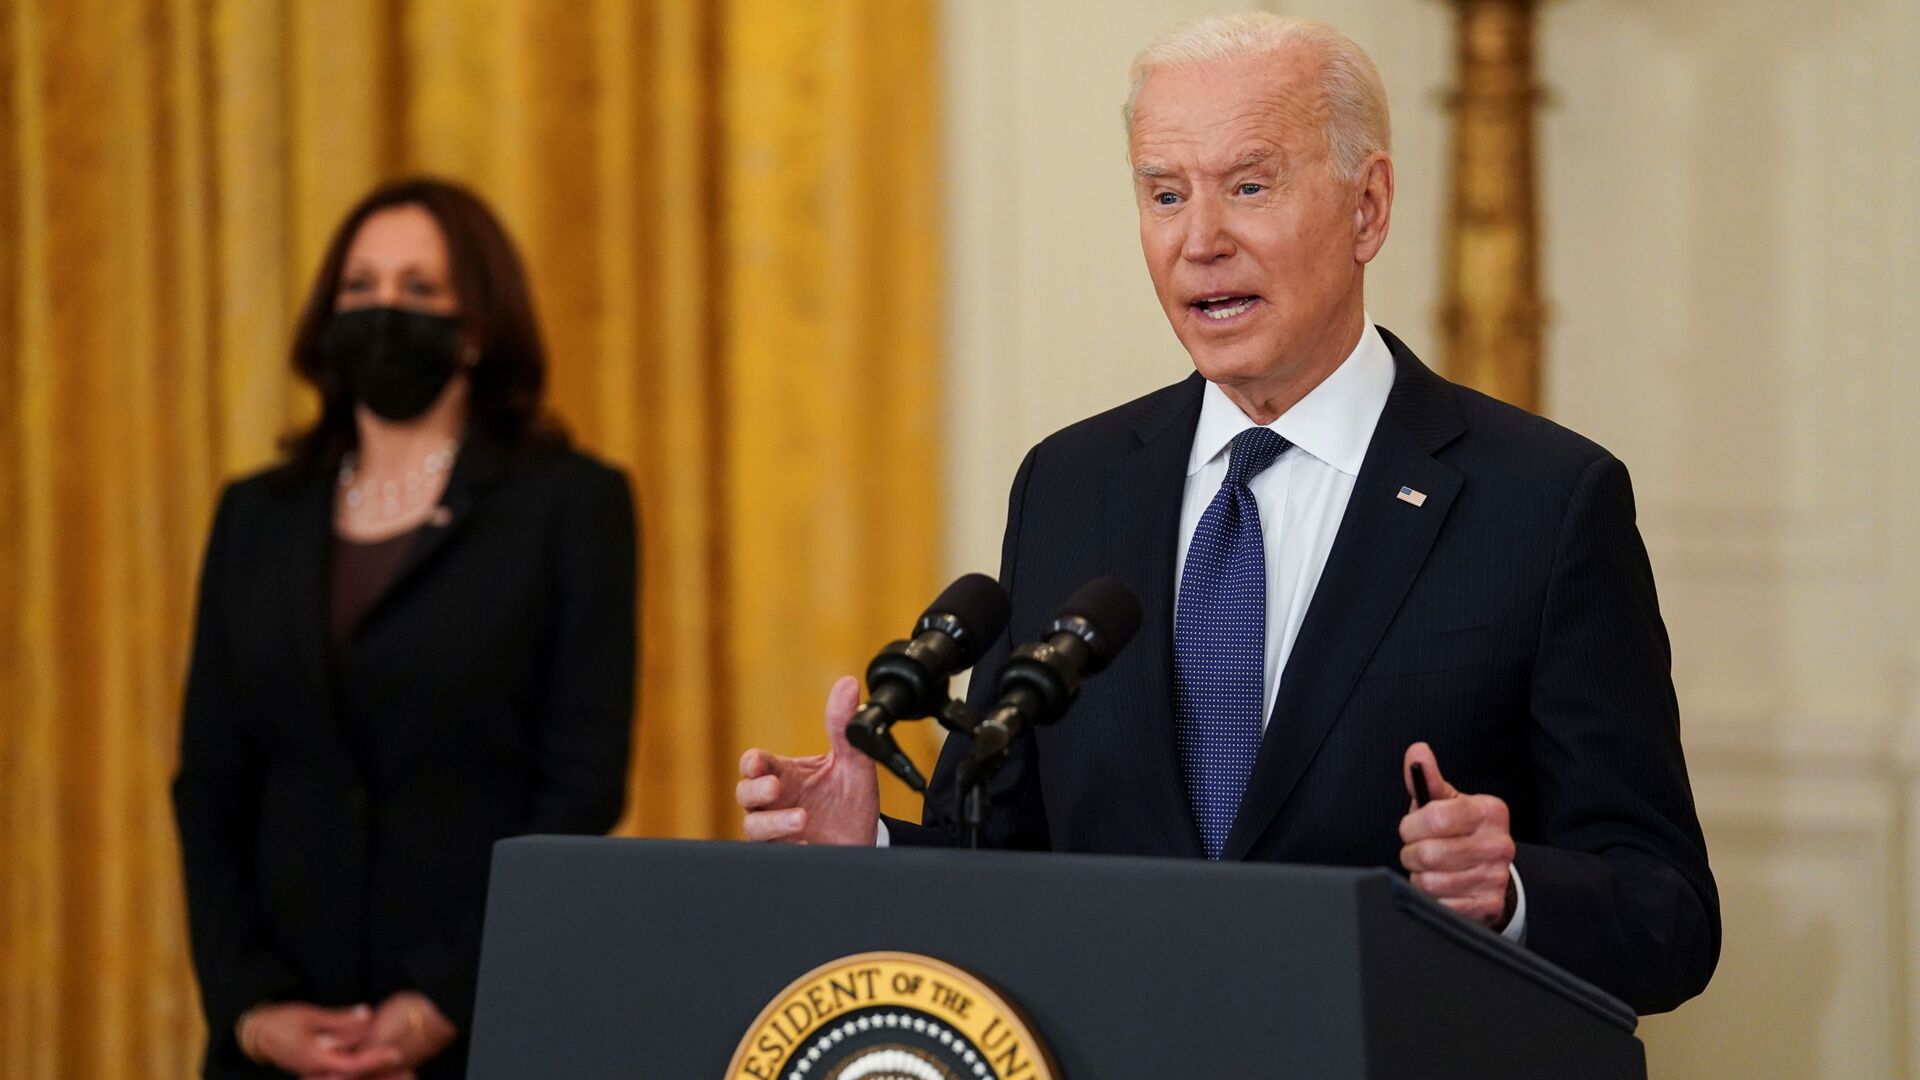 U.S. President Joe Biden delivers remarks on the U.S. economy as Vice President Kamala Harris stands by in the East Room at the White House in Washington, U.S., May 10, 2021 - Sputnik International, 1920, 02.04.2022